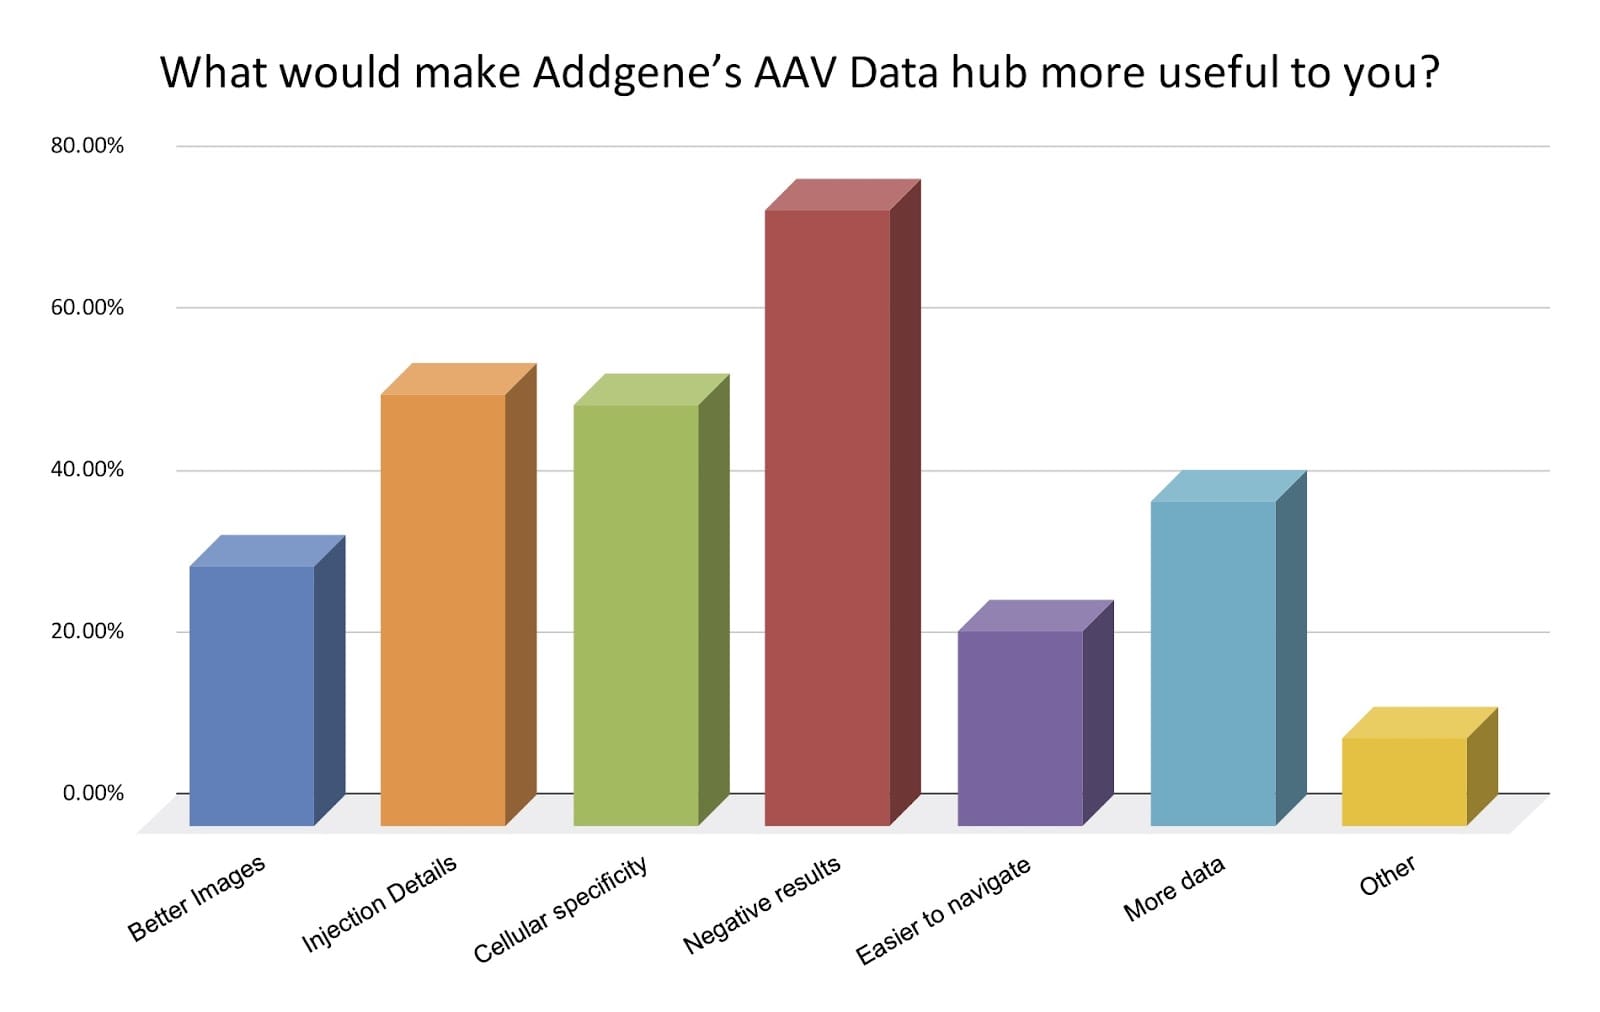 Survey results showing scientists want more negative data in the AAV data hub